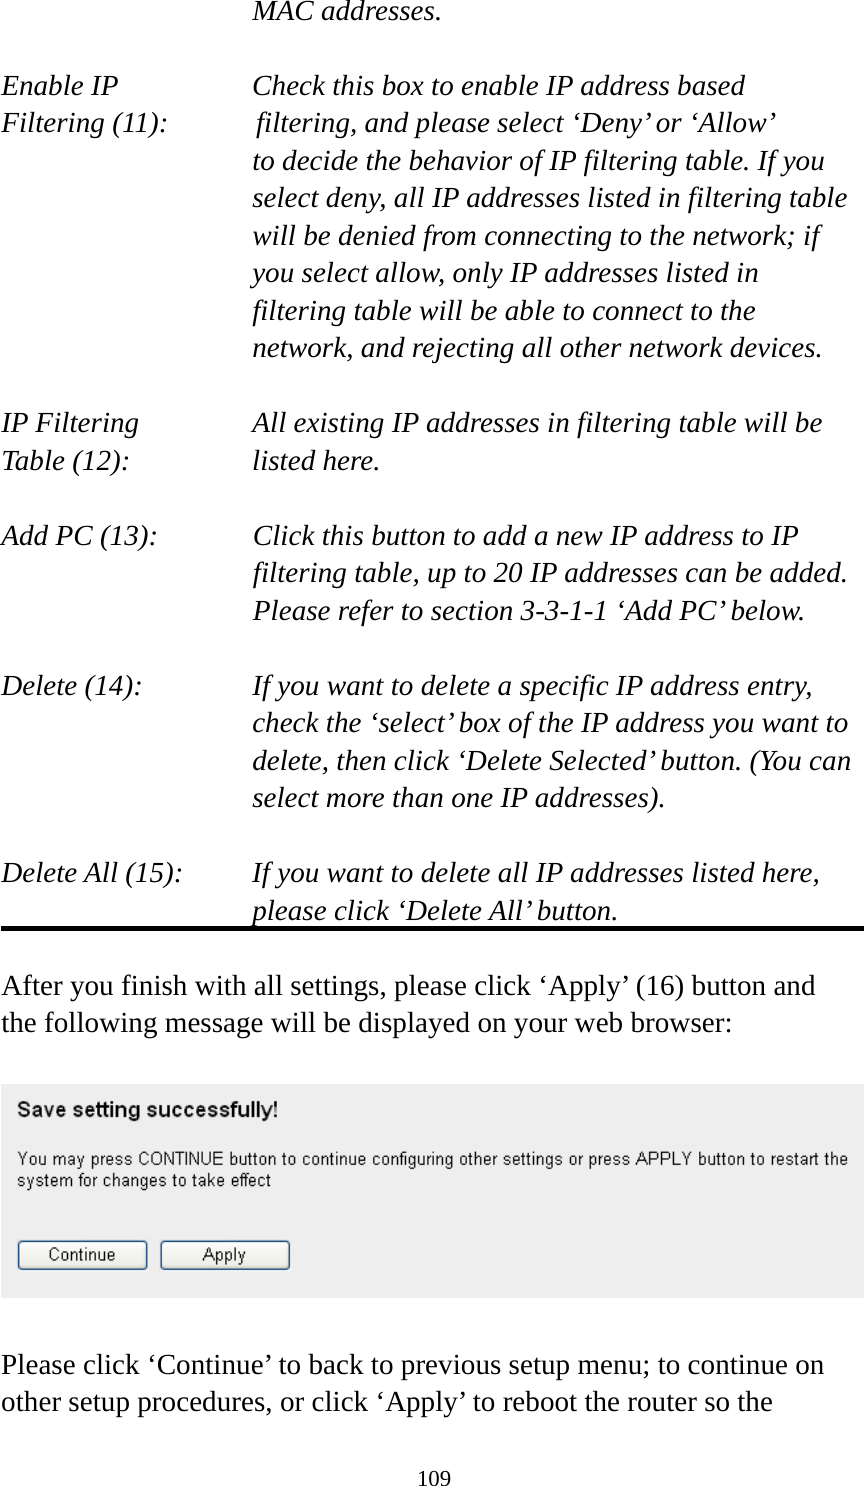 109 MAC addresses.  Enable IP        Check this box to enable IP address based Filtering (11):      filtering, and please select ‘Deny’ or ‘Allow’   to decide the behavior of IP filtering table. If you select deny, all IP addresses listed in filtering table will be denied from connecting to the network; if you select allow, only IP addresses listed in filtering table will be able to connect to the network, and rejecting all other network devices.  IP Filtering      All existing IP addresses in filtering table will be Table (12):       listed here.  Add PC (13):    Click this button to add a new IP address to IP filtering table, up to 20 IP addresses can be added.   Please refer to section 3-3-1-1 ‘Add PC’ below.    Delete (14):      If you want to delete a specific IP address entry,     check the ‘select’ box of the IP address you want to delete, then click ‘Delete Selected’ button. (You can select more than one IP addresses).  Delete All (15):    If you want to delete all IP addresses listed here, please click ‘Delete All’ button.  After you finish with all settings, please click ‘Apply’ (16) button and the following message will be displayed on your web browser:    Please click ‘Continue’ to back to previous setup menu; to continue on other setup procedures, or click ‘Apply’ to reboot the router so the 